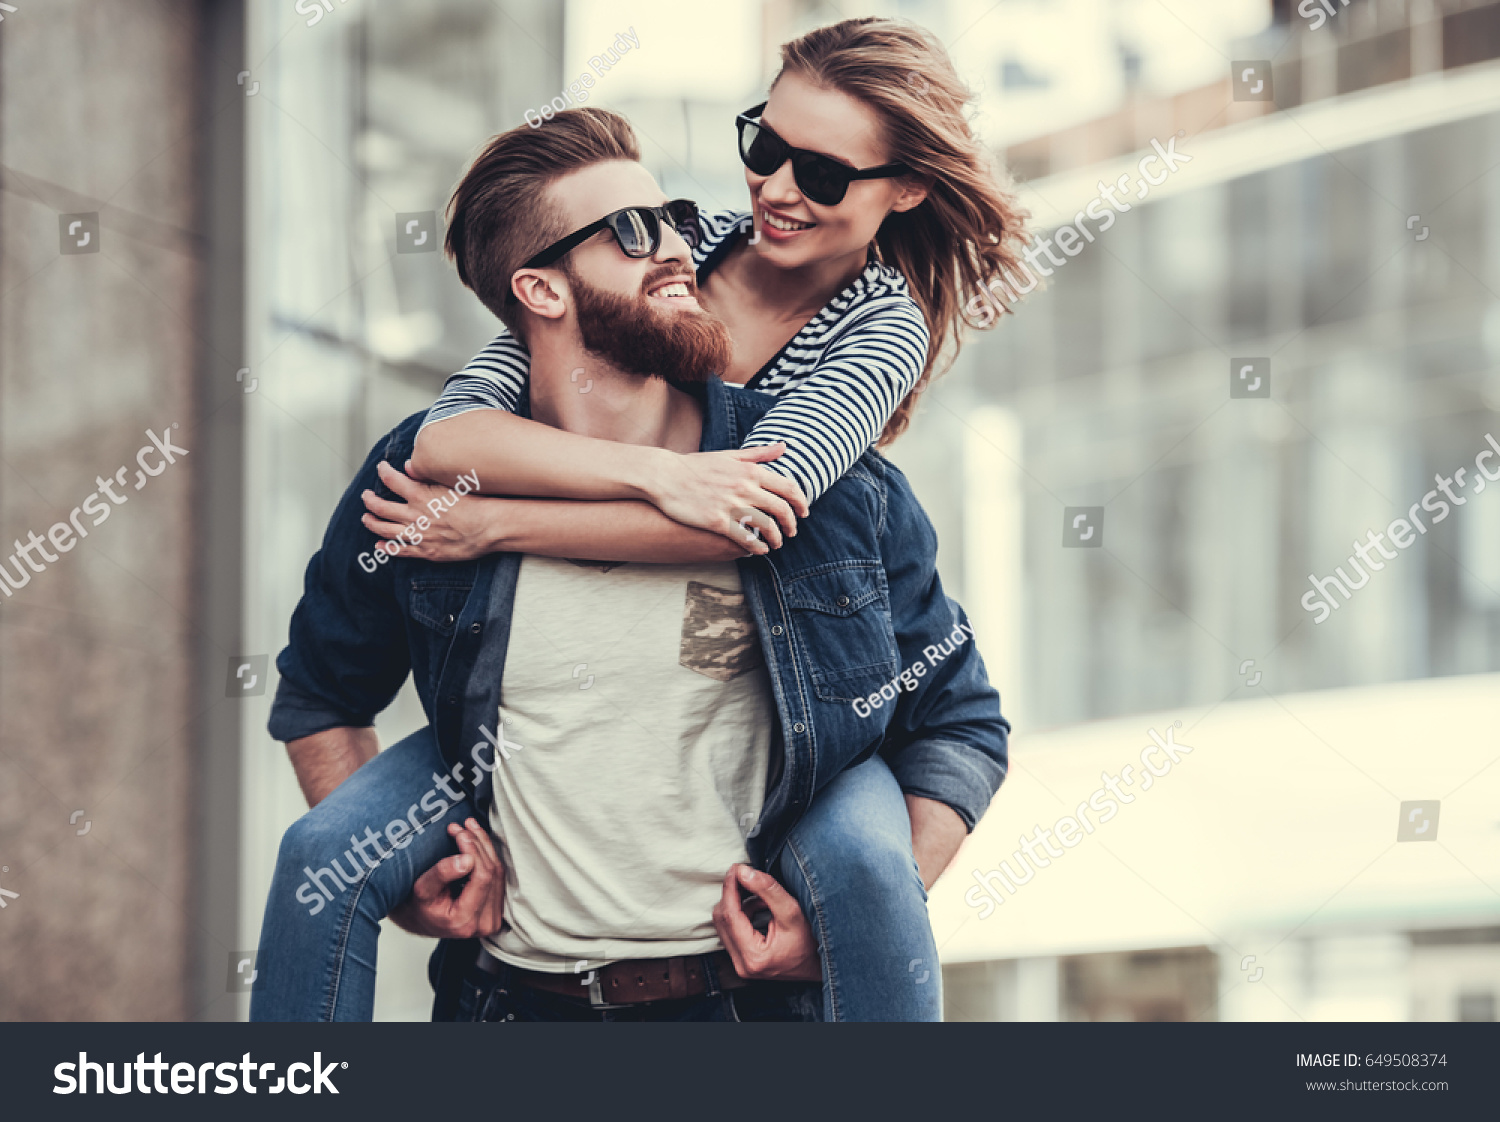 Beautiful young couple in sun glasses looking at each other and smiling while standing outdoors. Girl piggyback #649508374